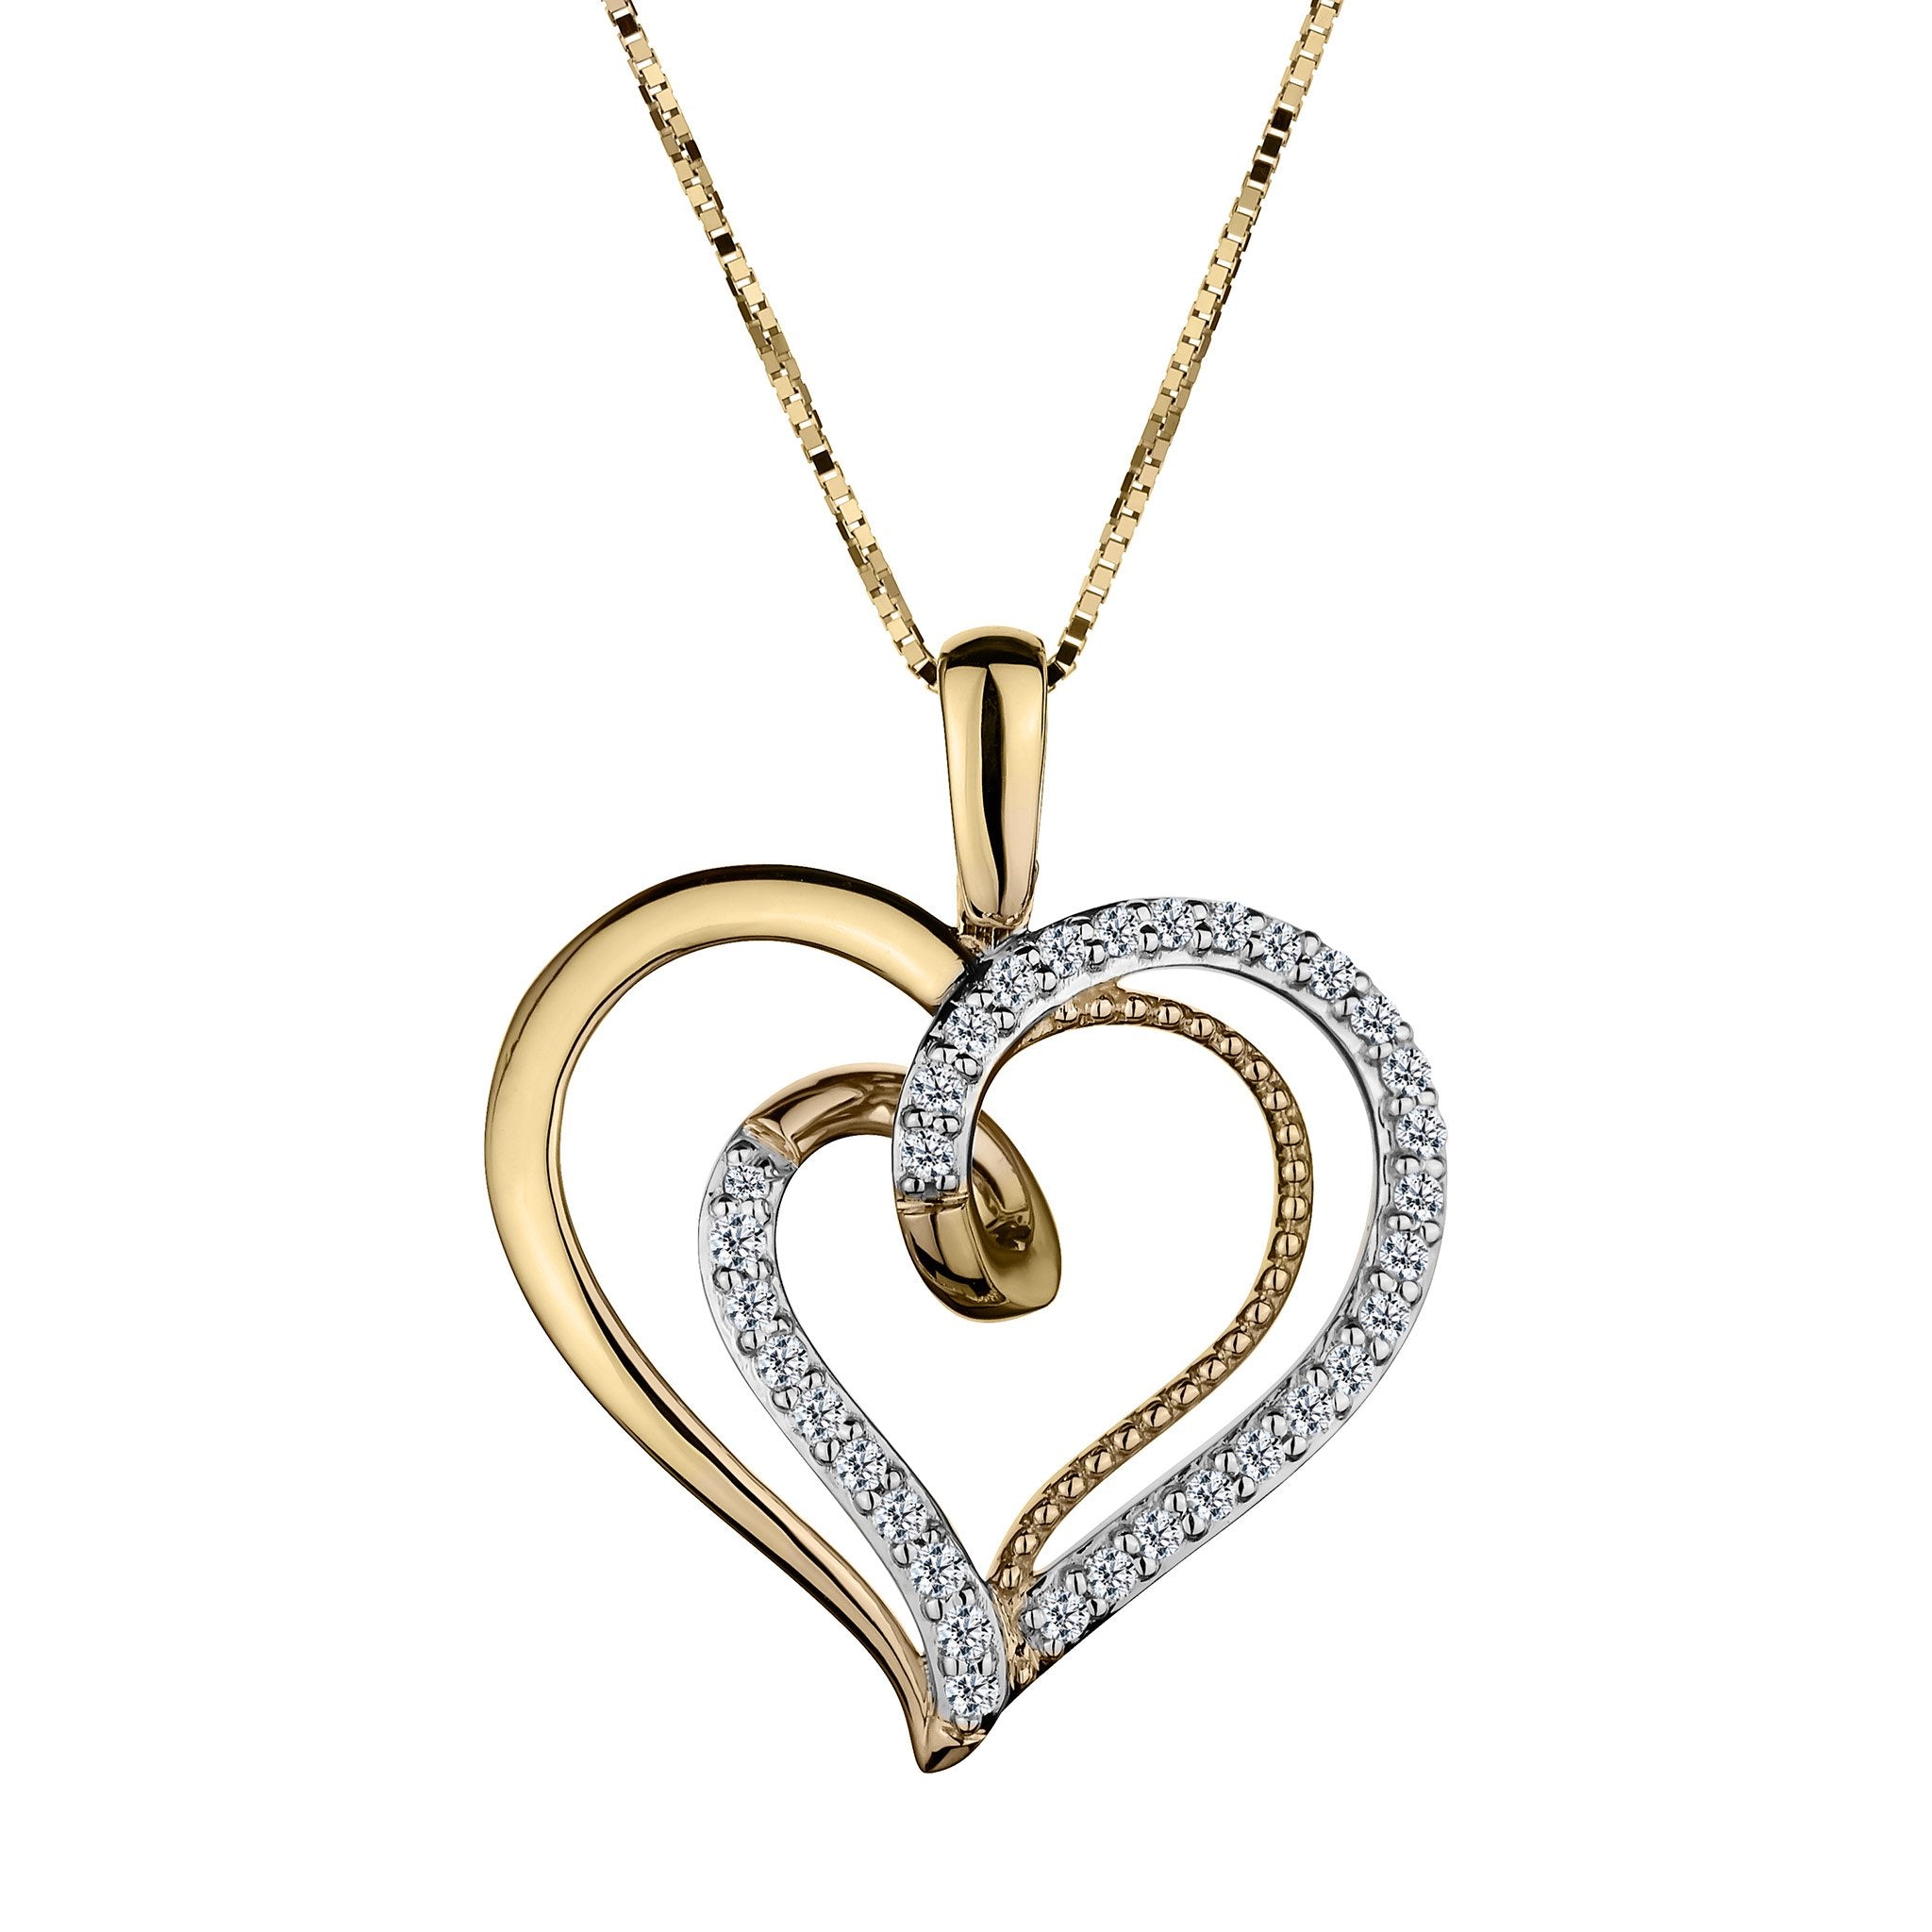 .16 Carat Diamond Heart Pendant,  10kt Yellow Gold. Necklaces and Pendants. Griffin Jewellery Designs.